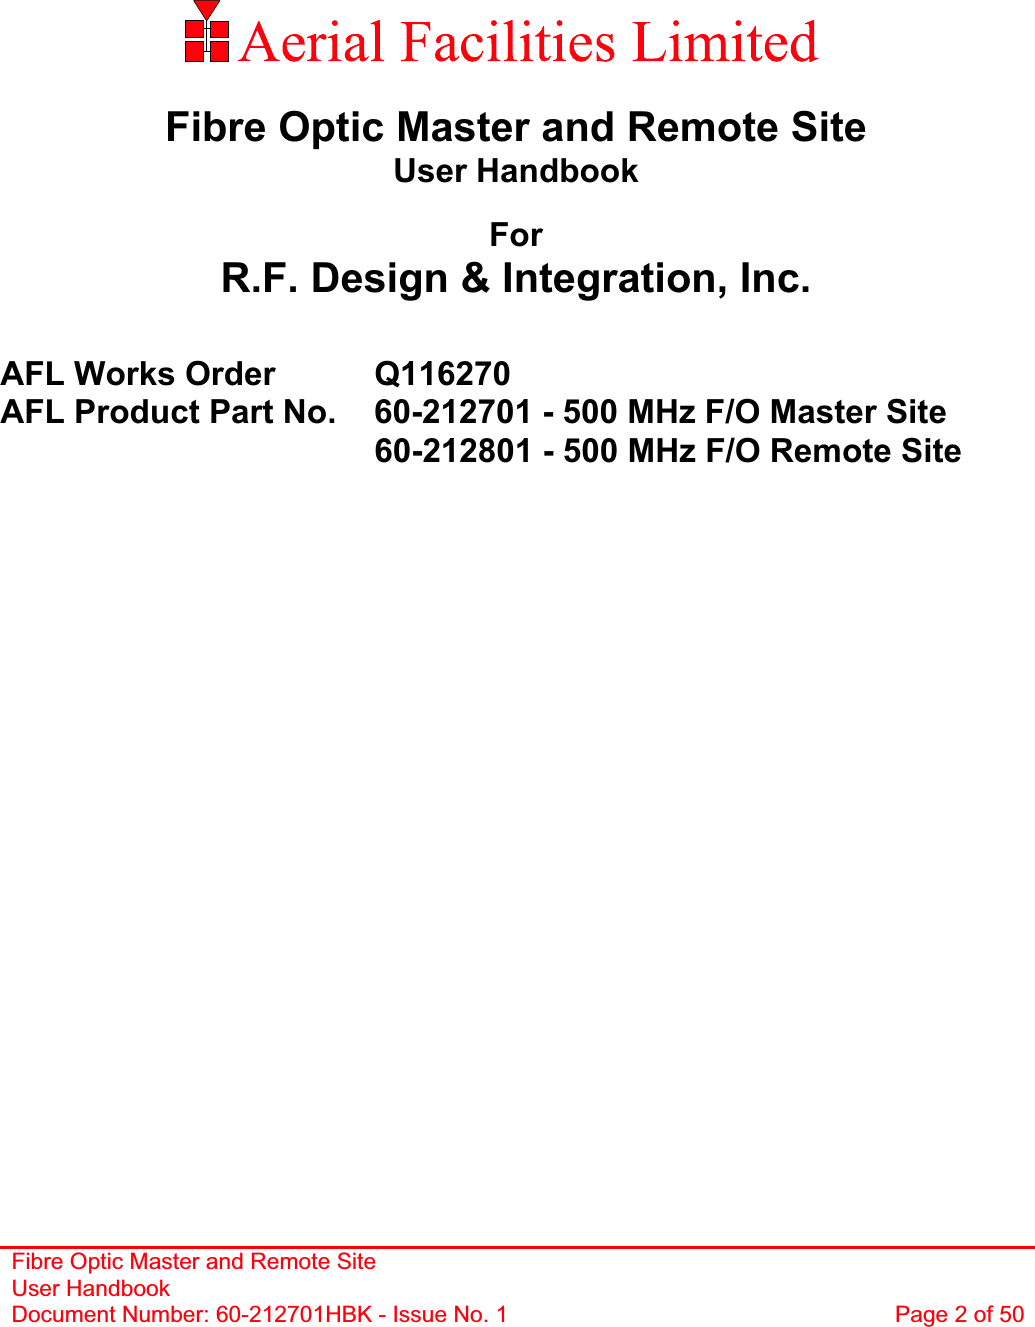 Fibre Optic Master and Remote Site User Handbook Document Number: 60-212701HBK - Issue No. 1  Page 2 of 50Fibre Optic Master and Remote Site User Handbook ForR.F. Design &amp; Integration, Inc. AFL Works Order     Q116270 AFL Product Part No.   60-212701 - 500 MHz F/O Master Site           60-212801 - 500 MHz F/O Remote Site 